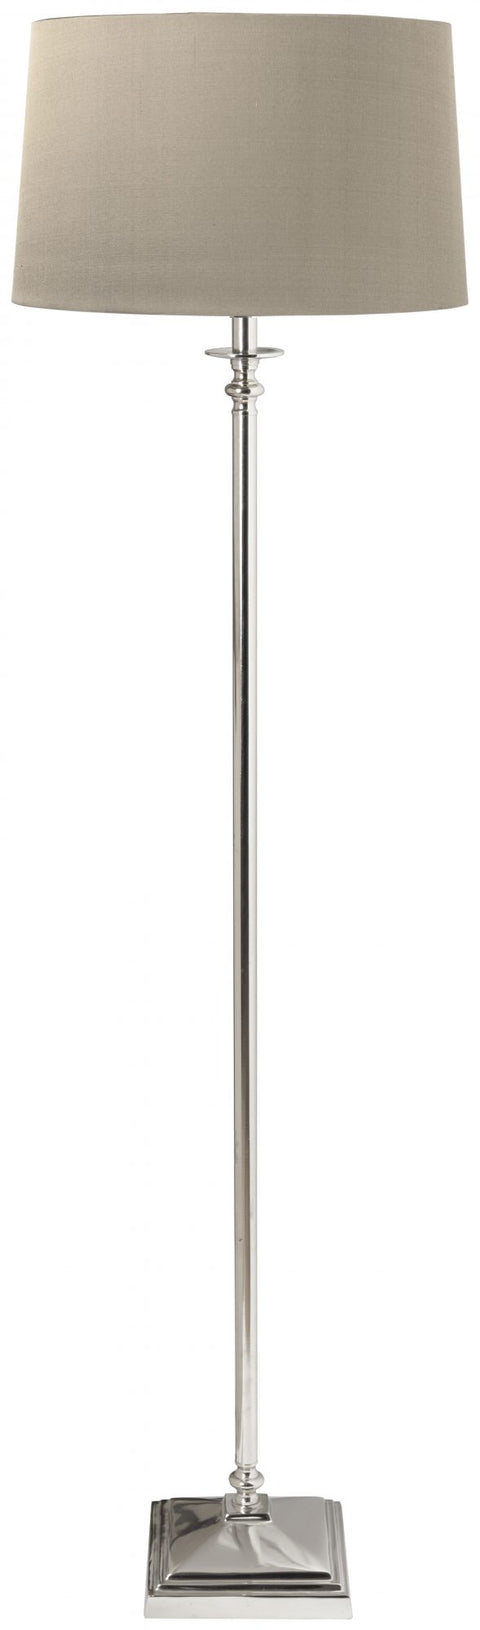 Neptune Hanover Nickel Floor Lamp with 19' Lucile Warm White Shade